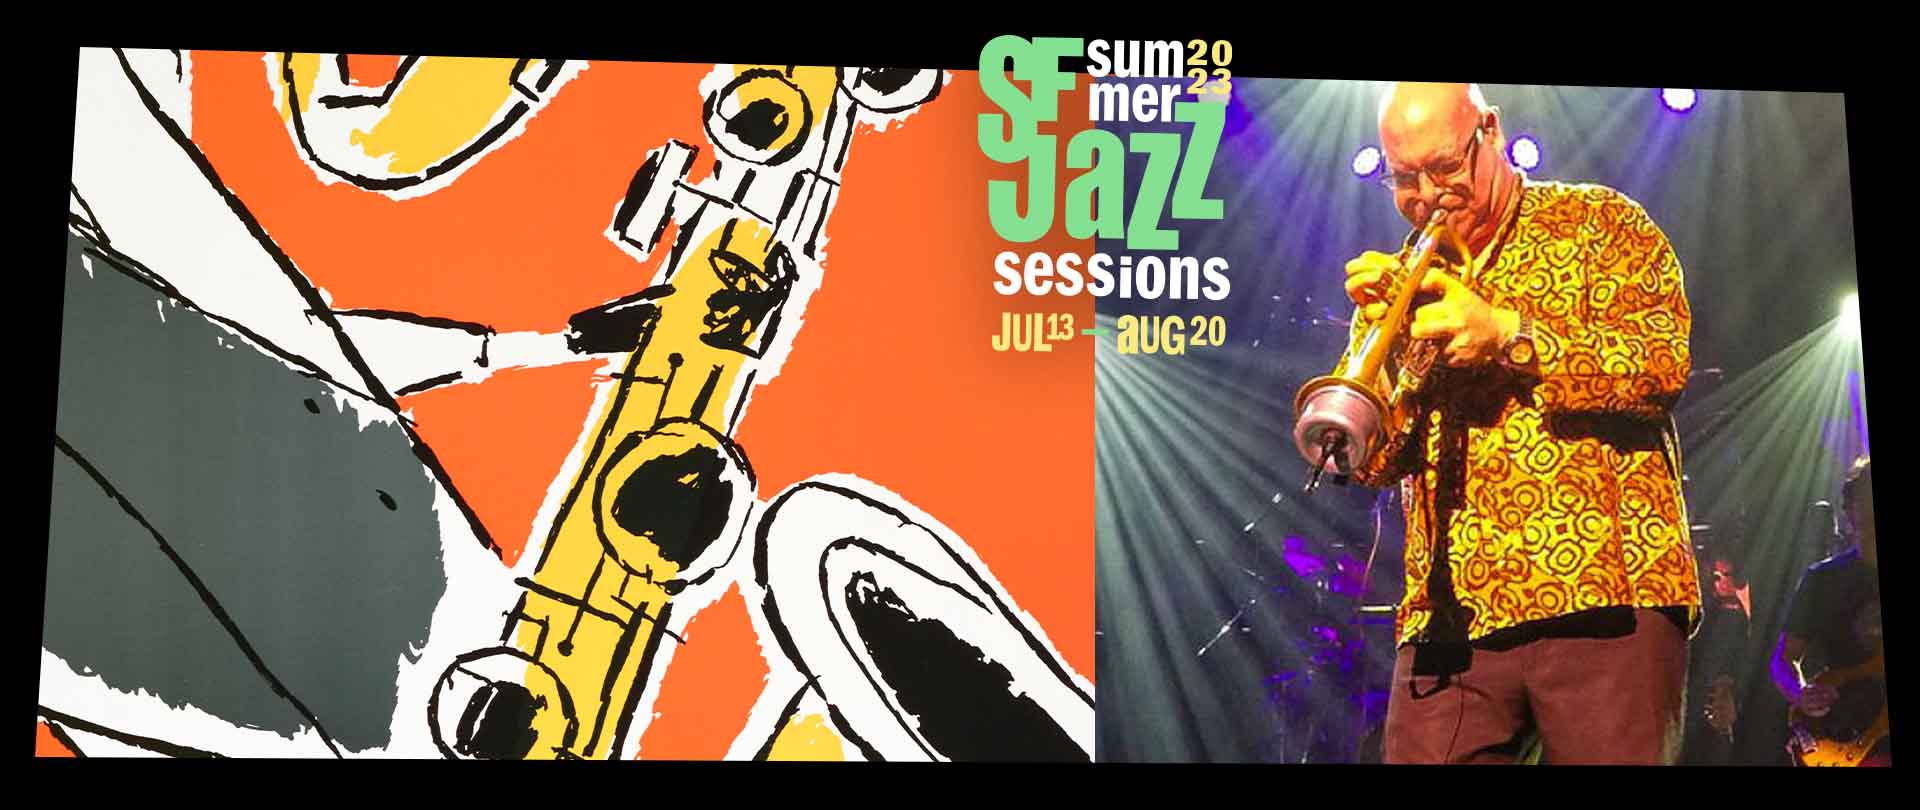 Bill Ortiz performing live with the 2023 Summer Sessions artwork